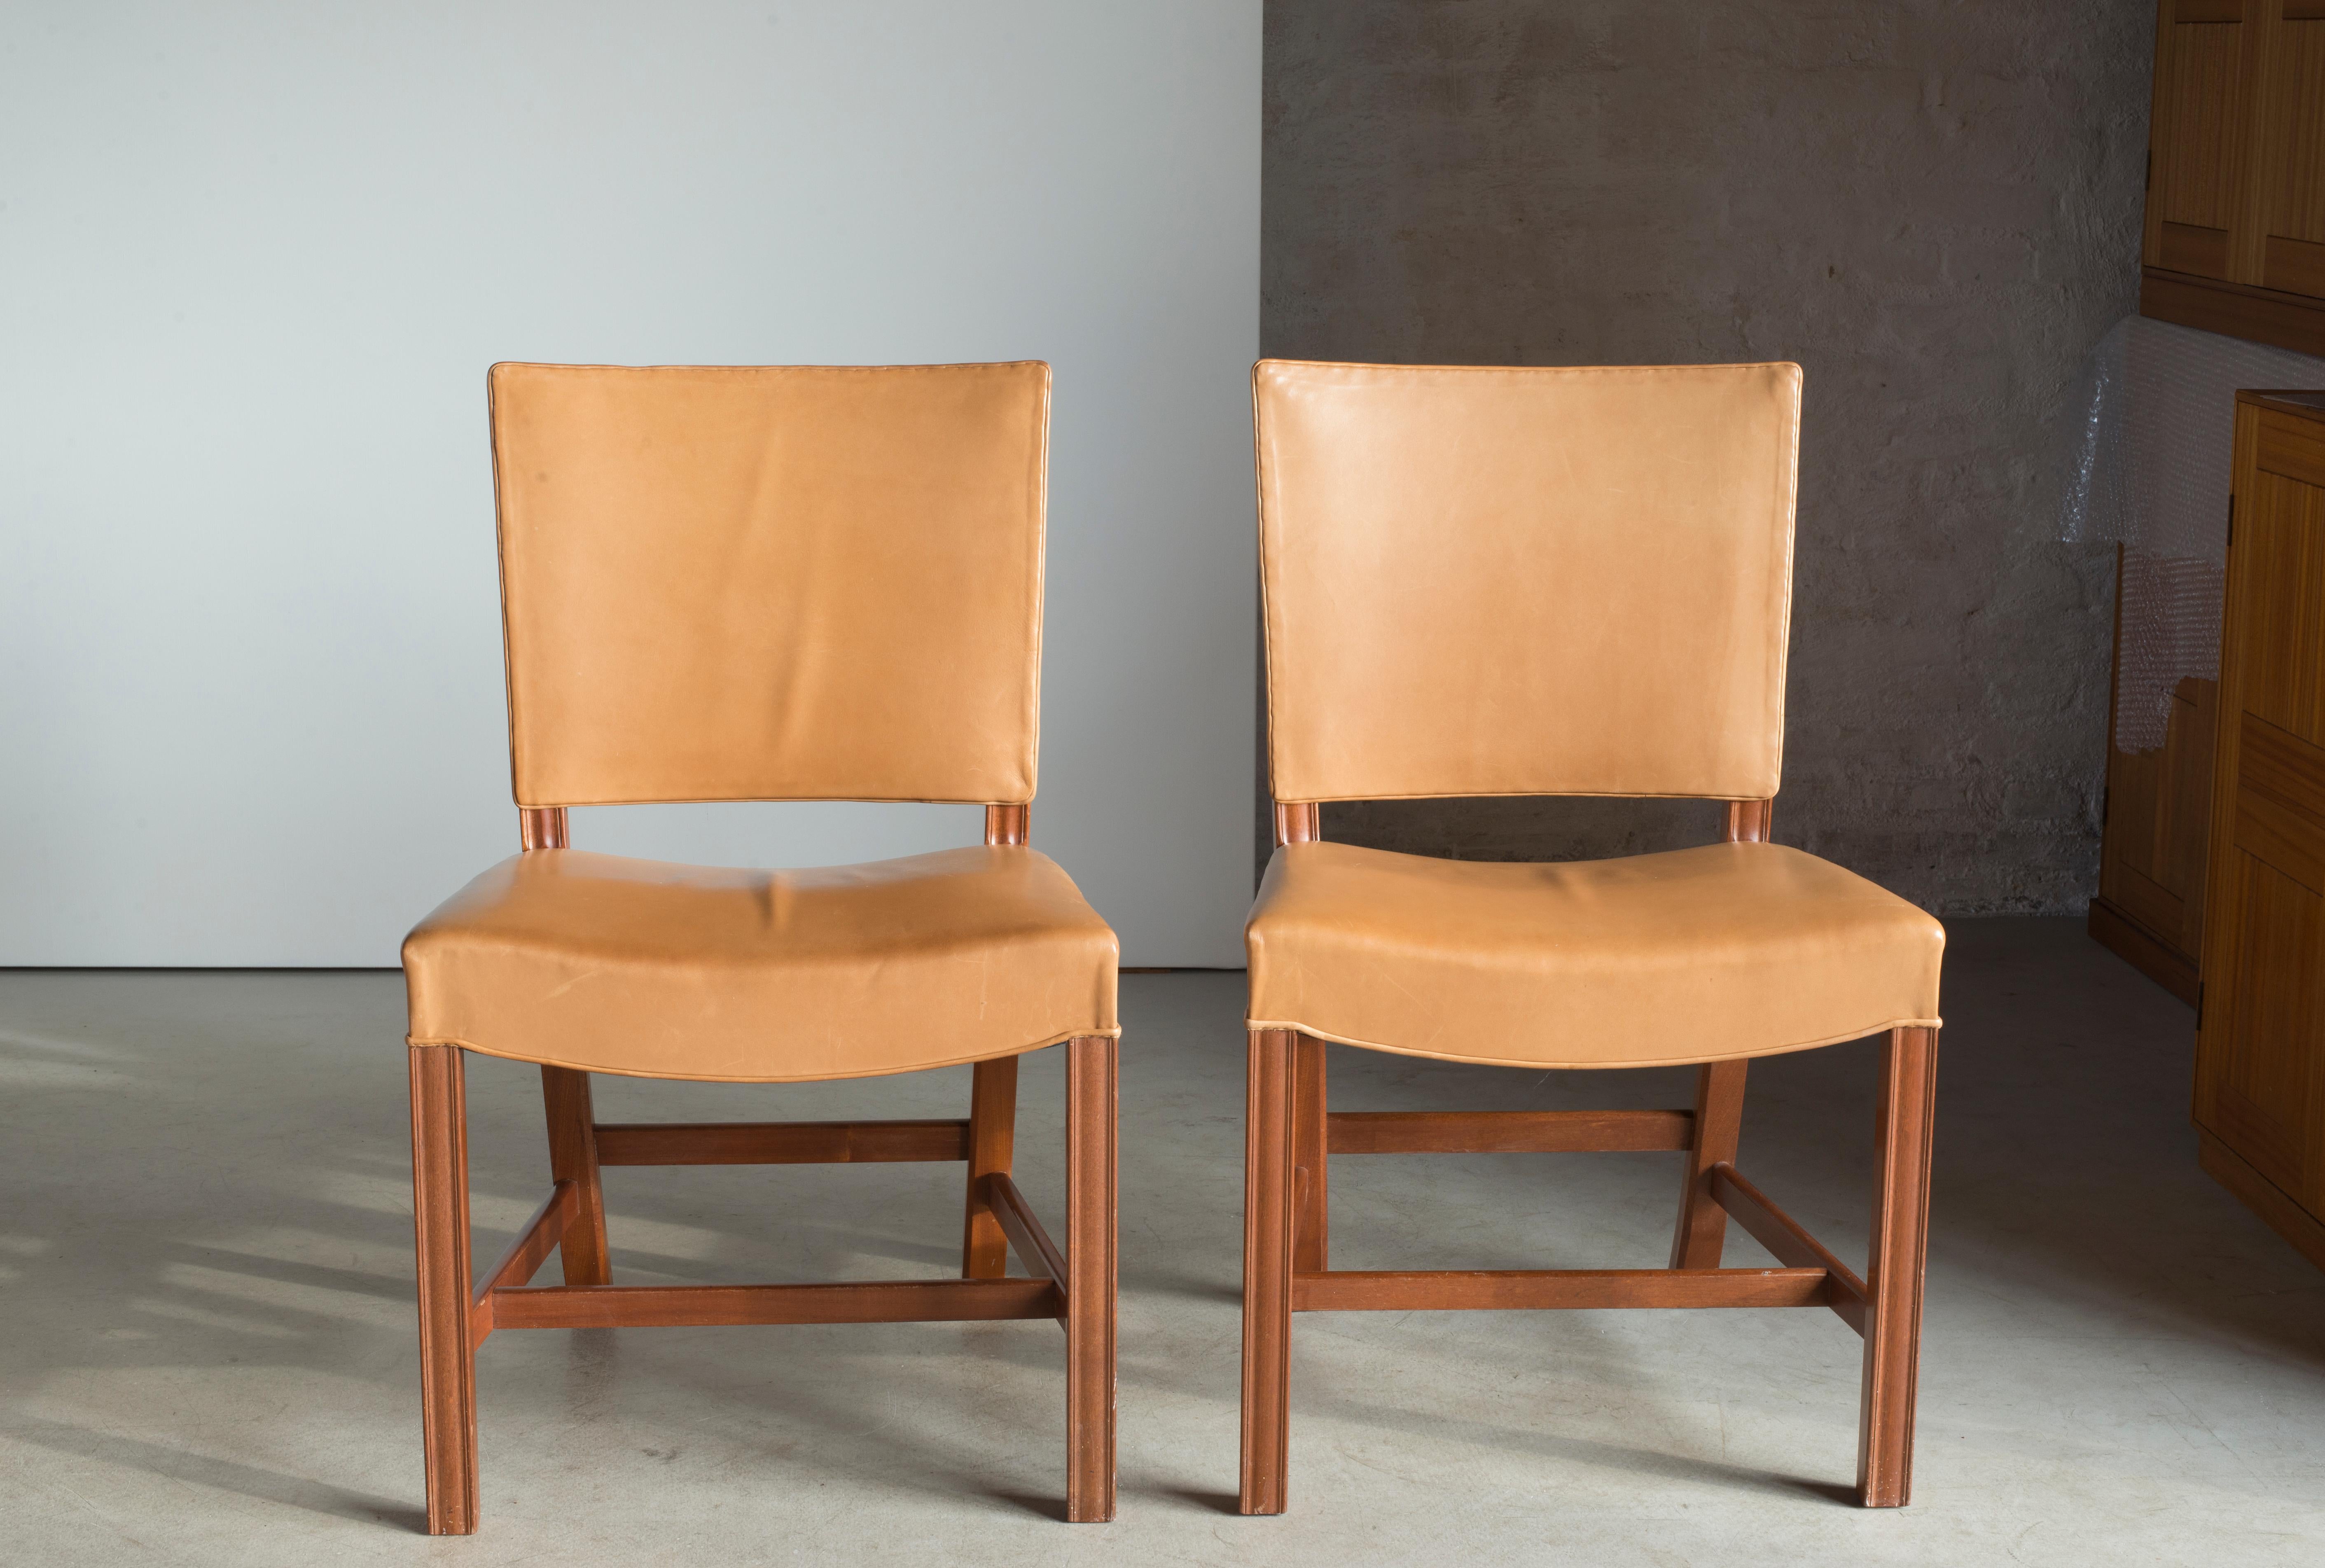 Kaare Klint set of four red chairs in mahogany and leather. Executed by Rud. Rasmussen.